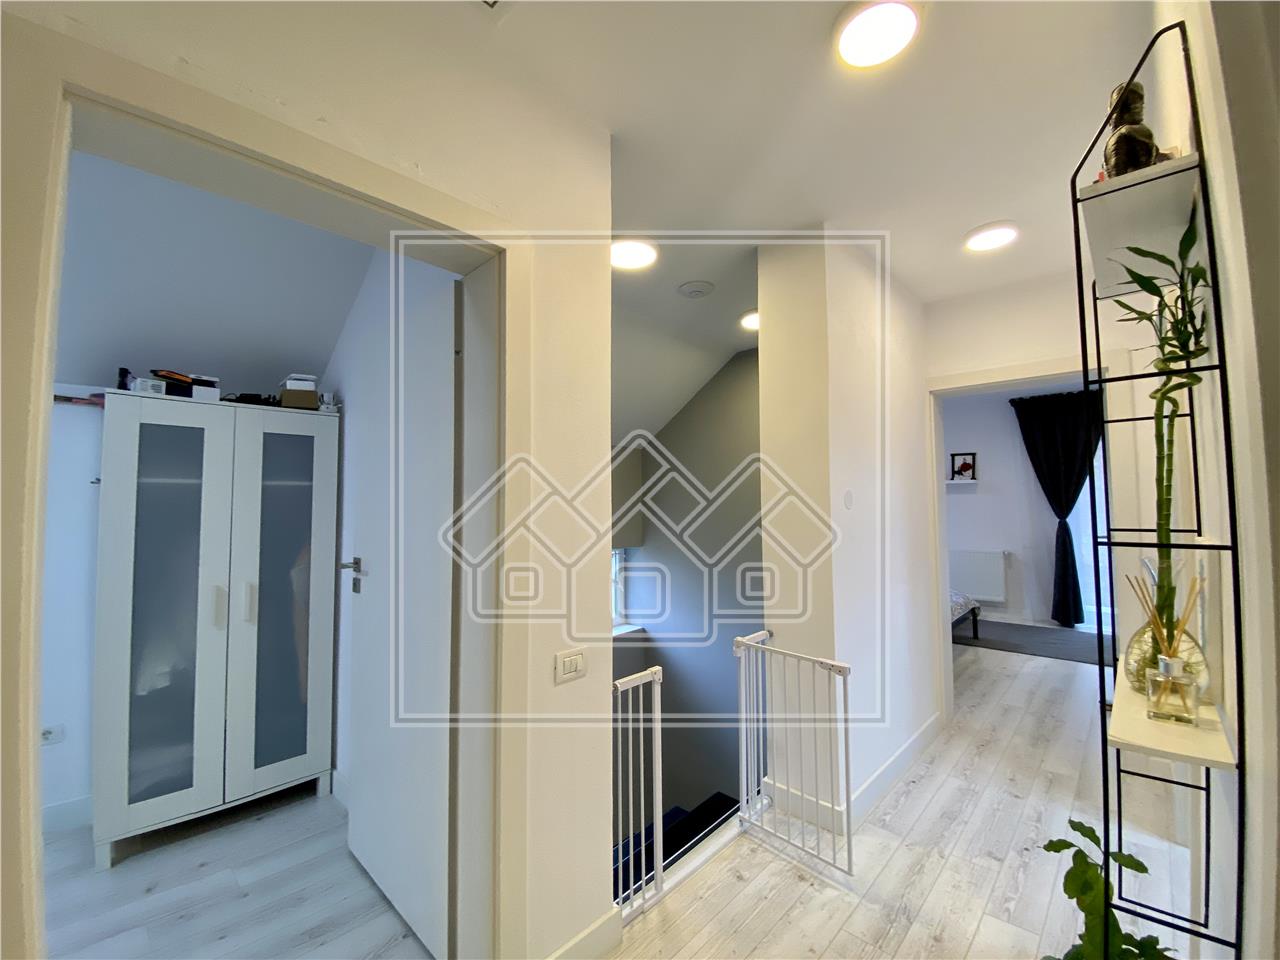 House for sale in Alba Iulia  - 4 rooms - Turnkey delivery